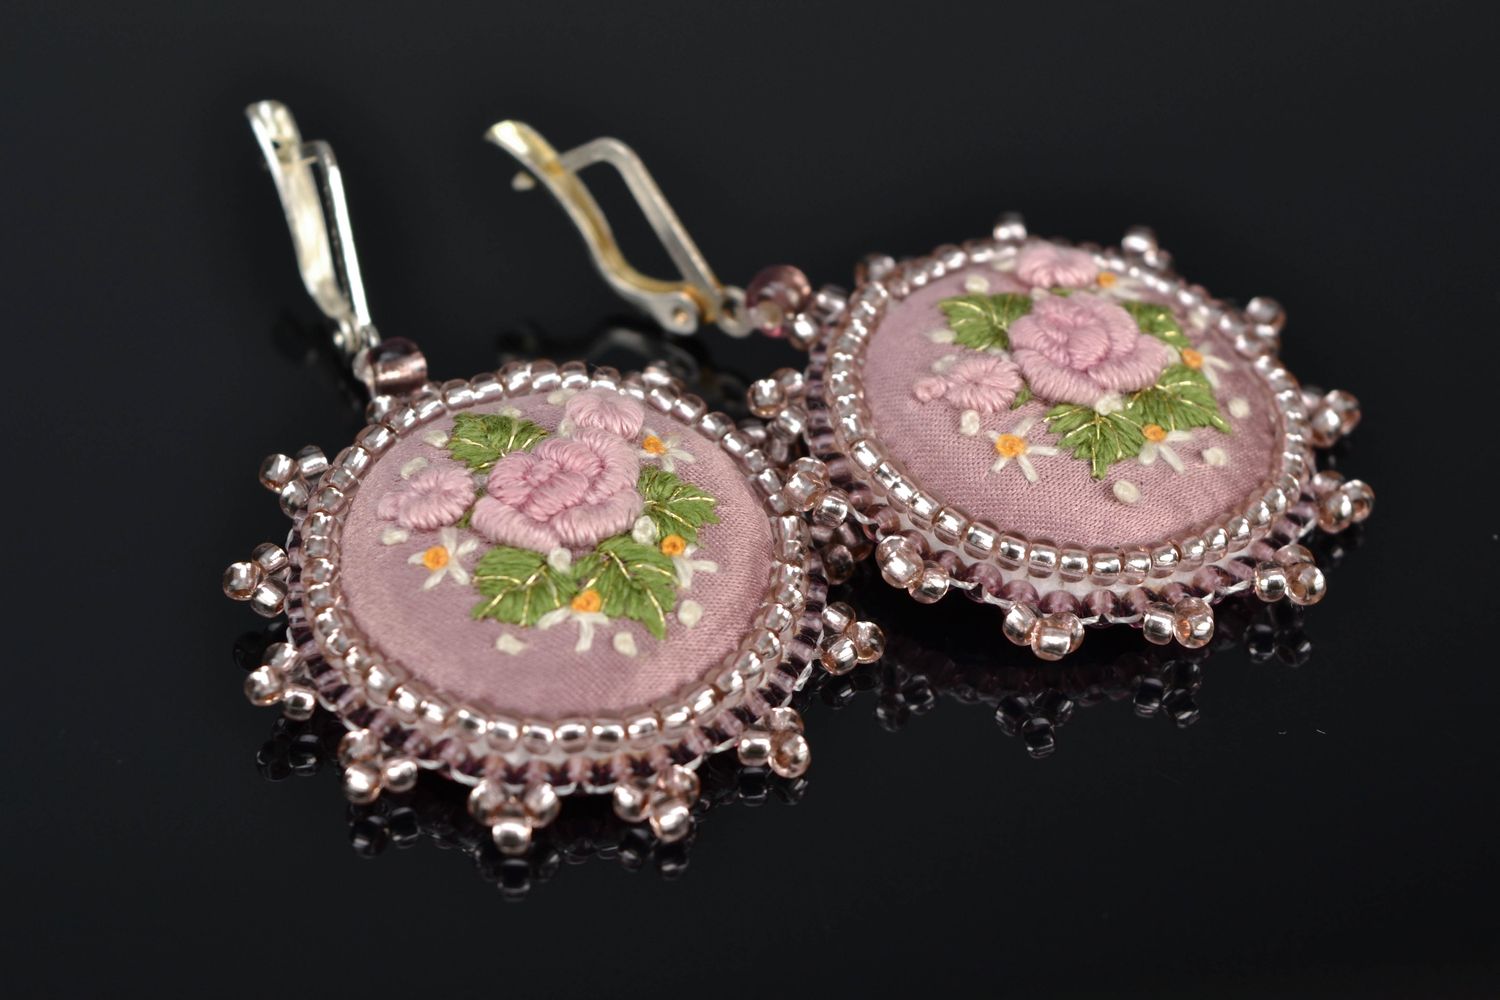 Festive earrings with embroidery and beads photo 1